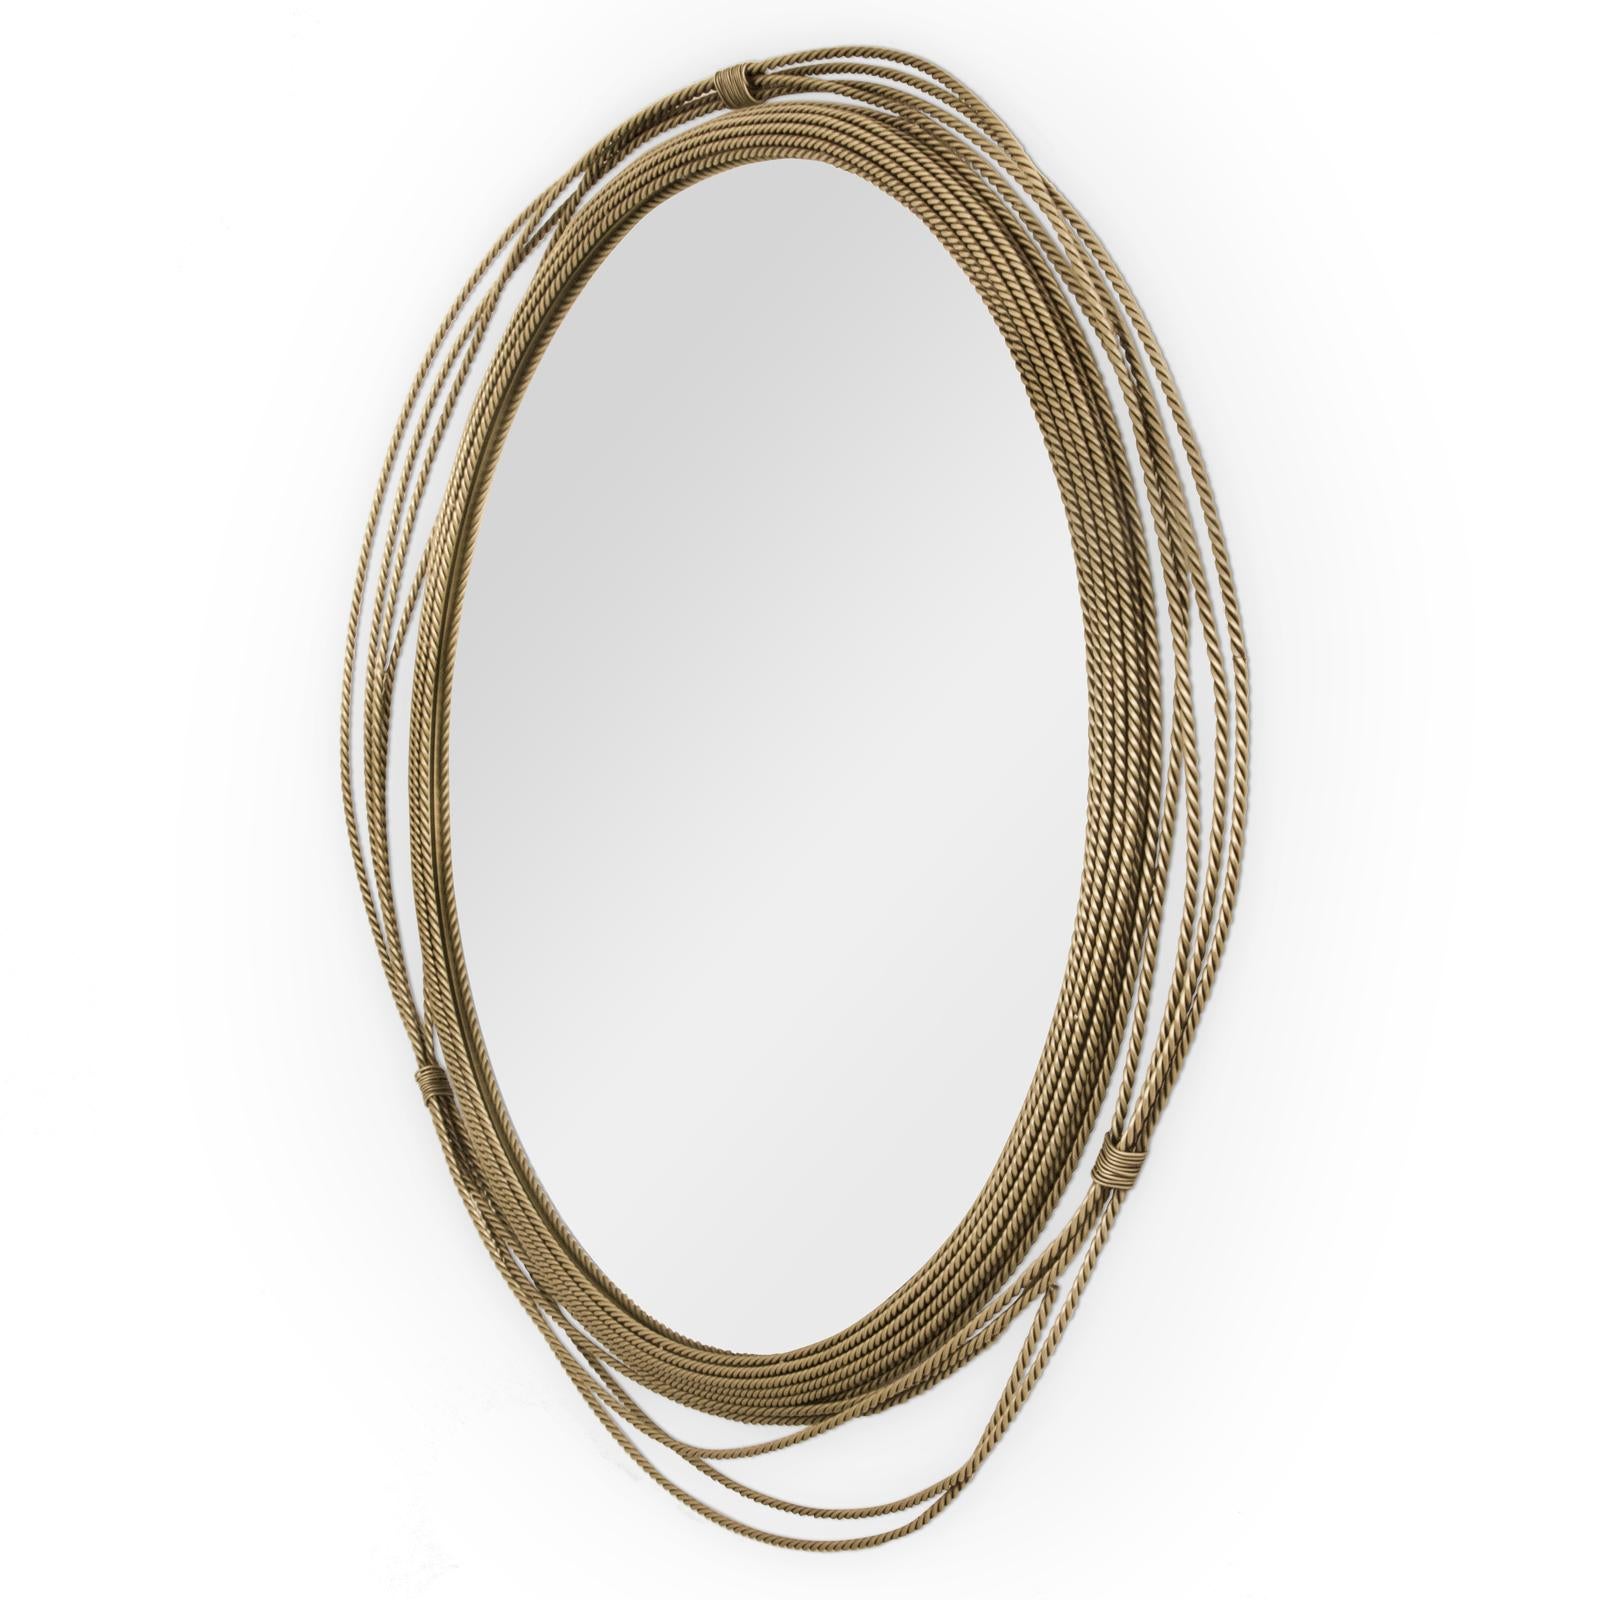 Mirror brass knot round with vintage brass
frame structure and with mirror glass.